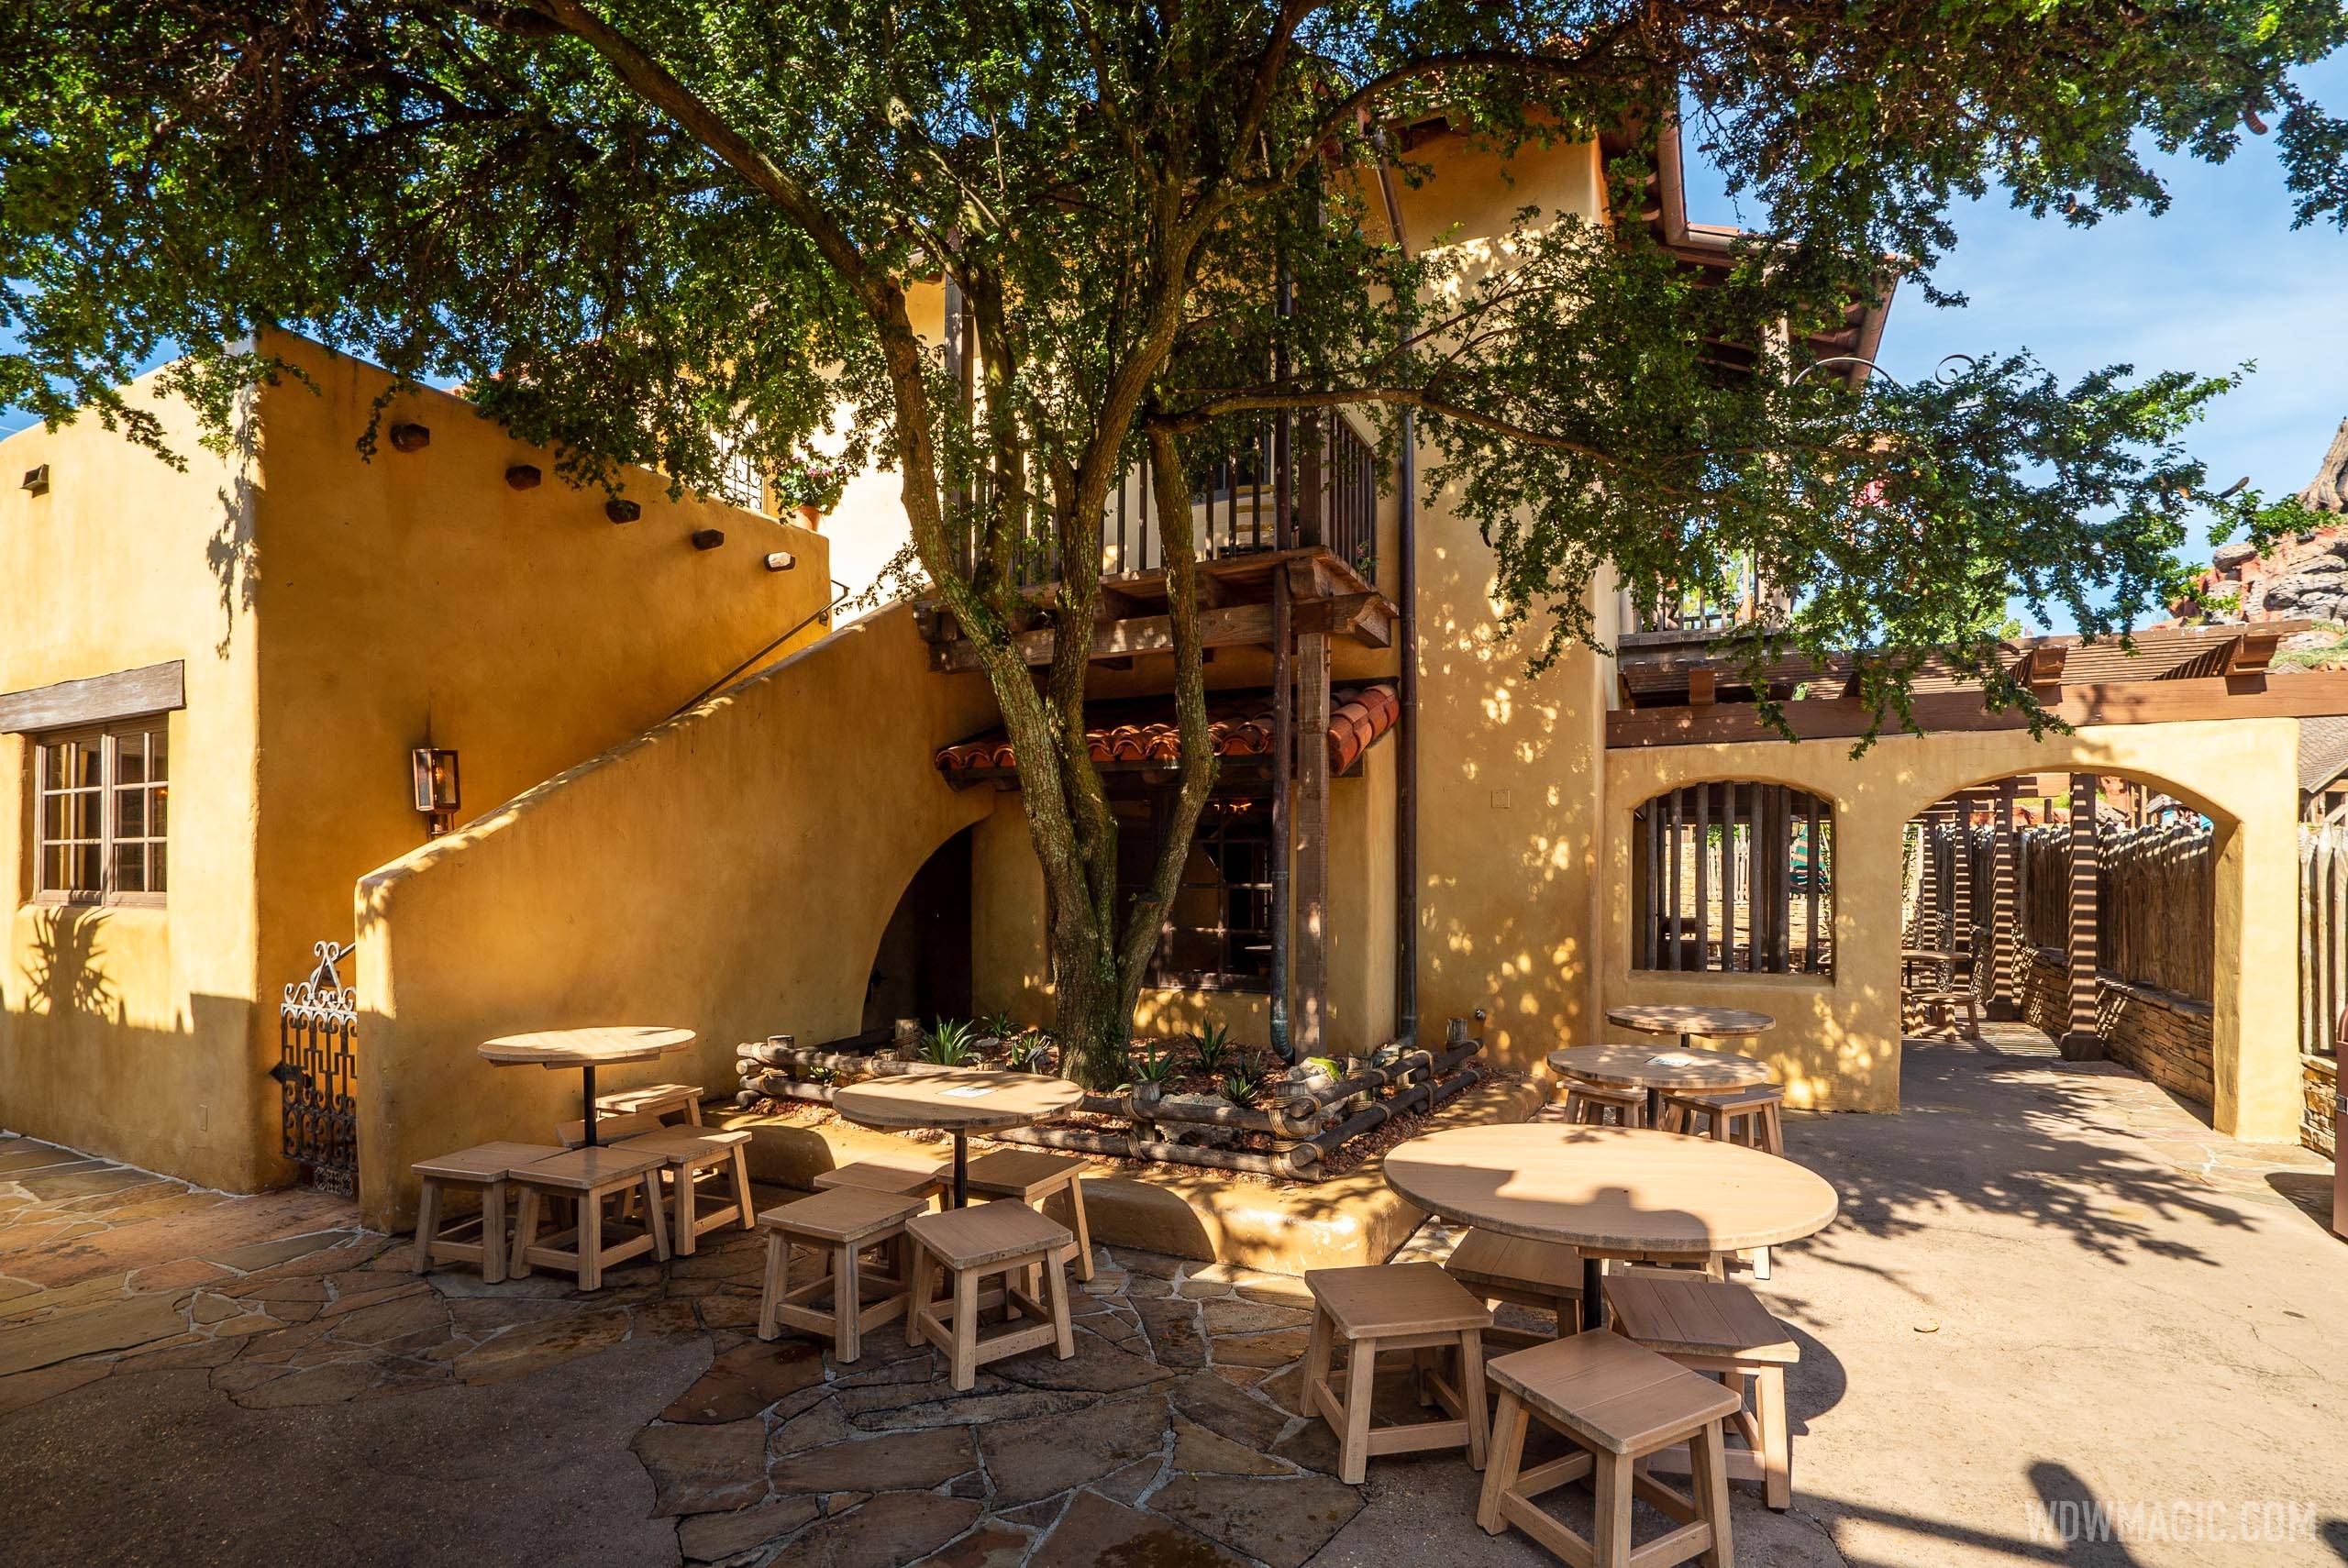 Pecos Bill cafe overview